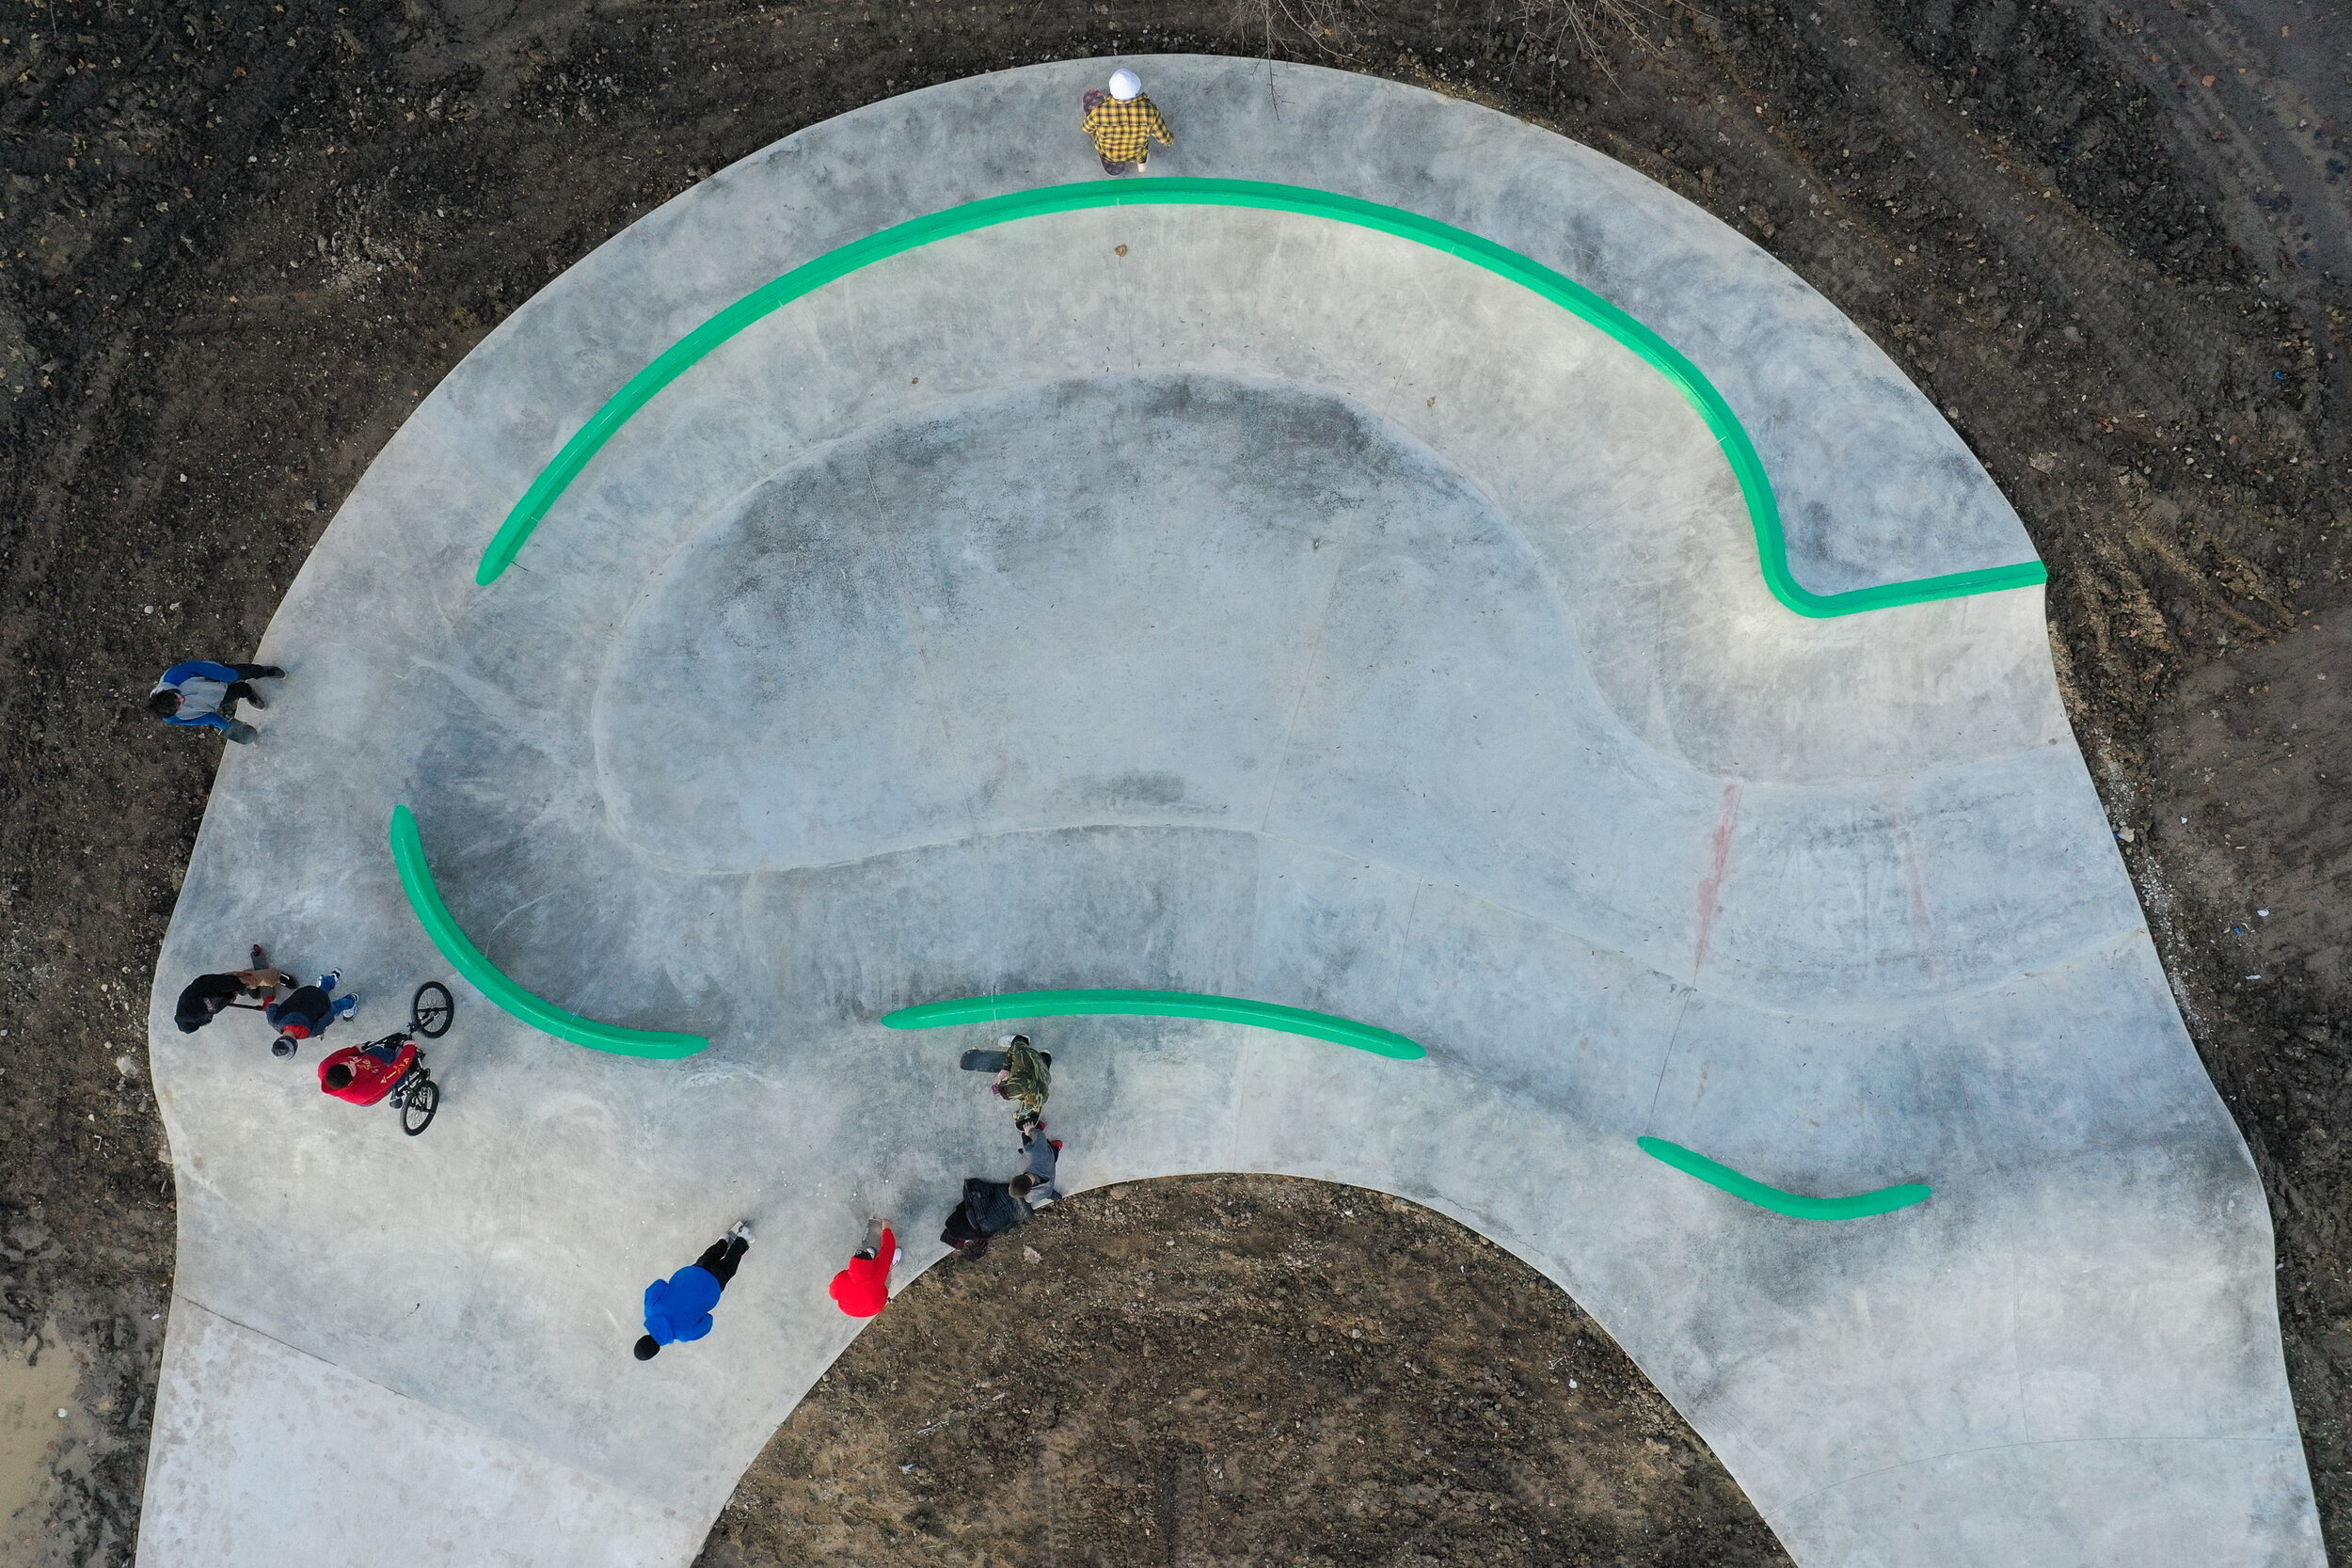 The Sturtevant, Wisconsin #skatepath is a great mixture of street obstacles, transition, &amp; flow and for its small footprint (5,900 square feet) it holds a crowd pretty well 💯 